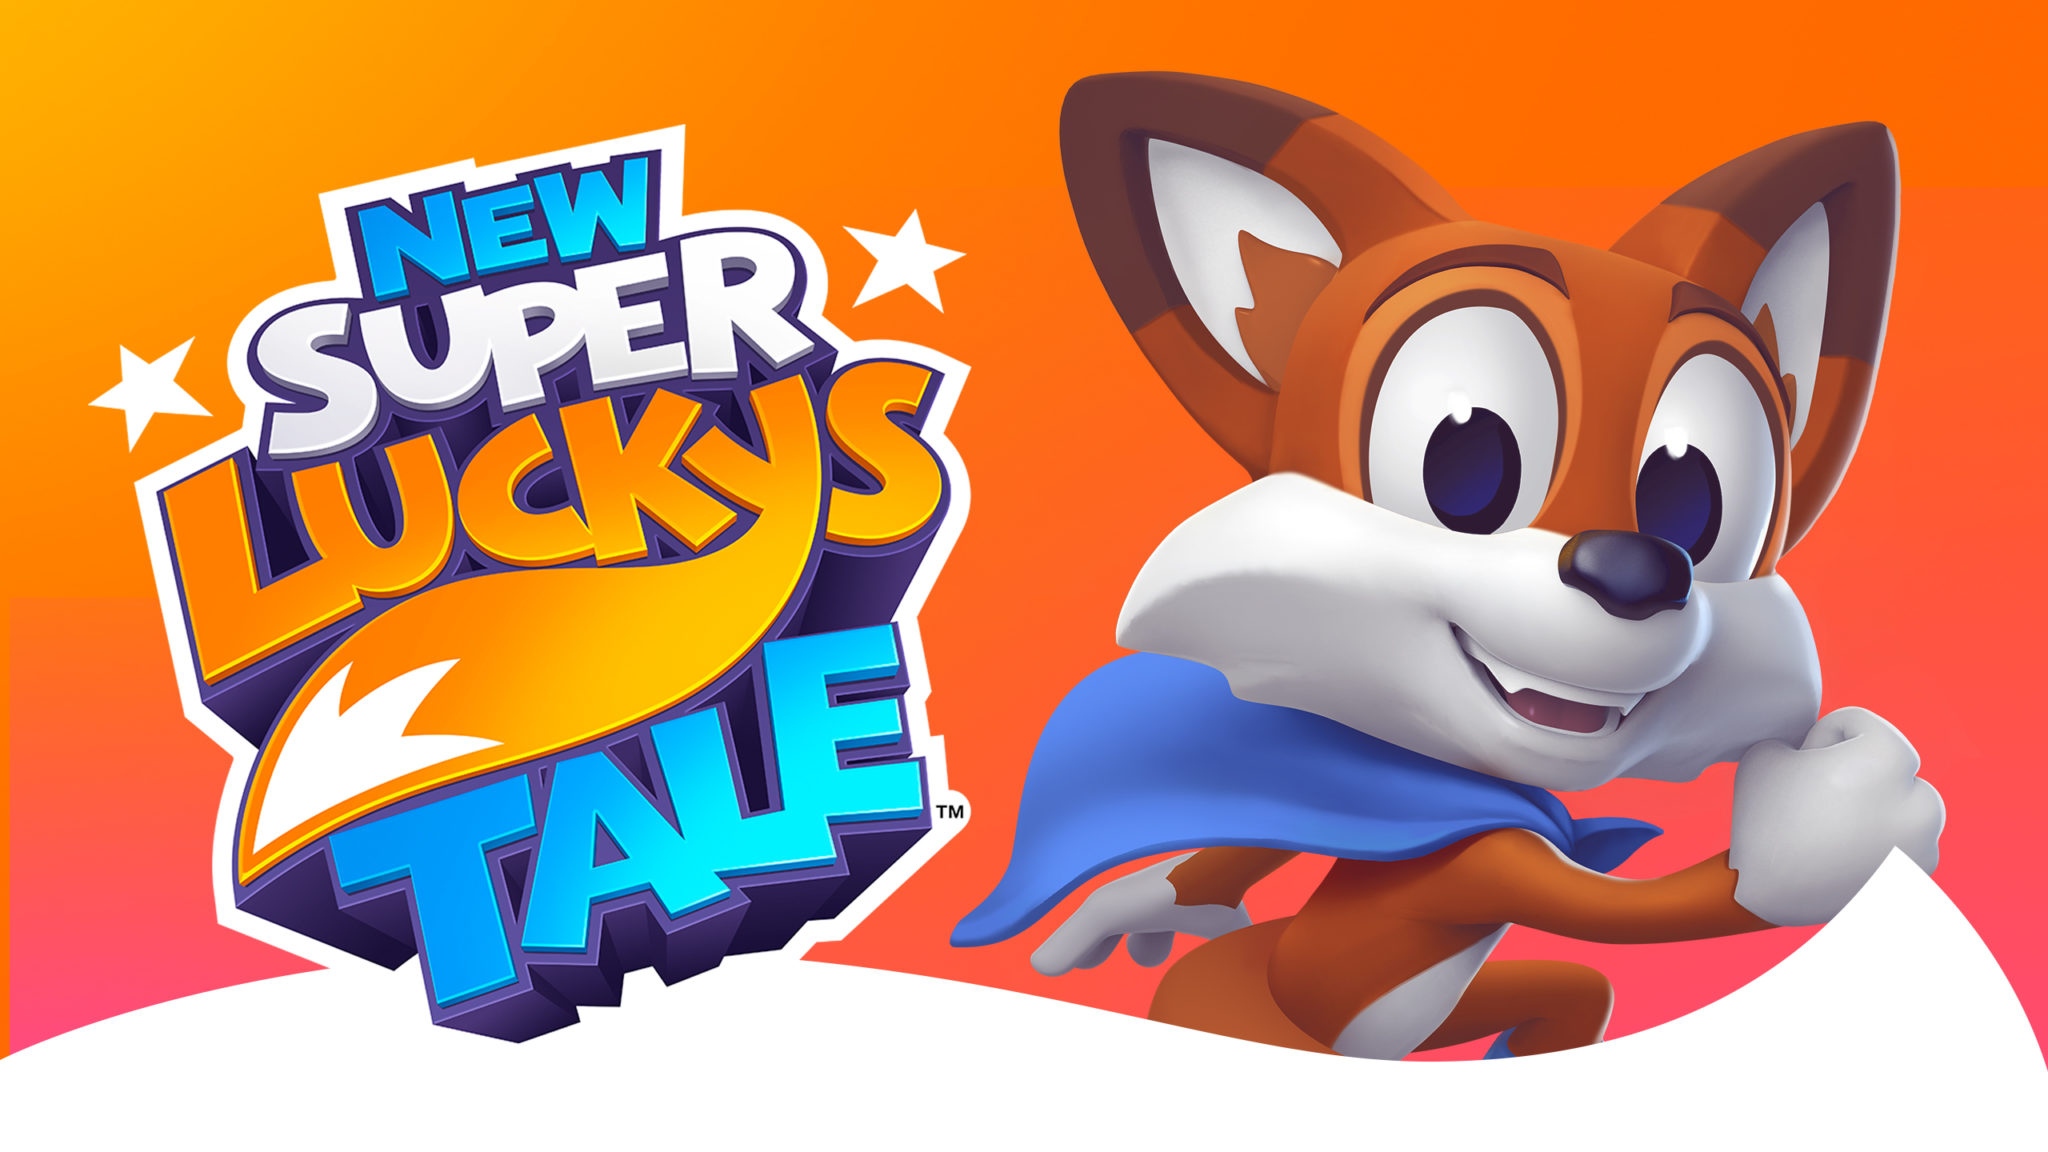 New lucky tale. Игра New super Lucky's Tale. New super Lucky's Tale Nintendo Switch. Лисенок лаки. Лисенок лаки игра.